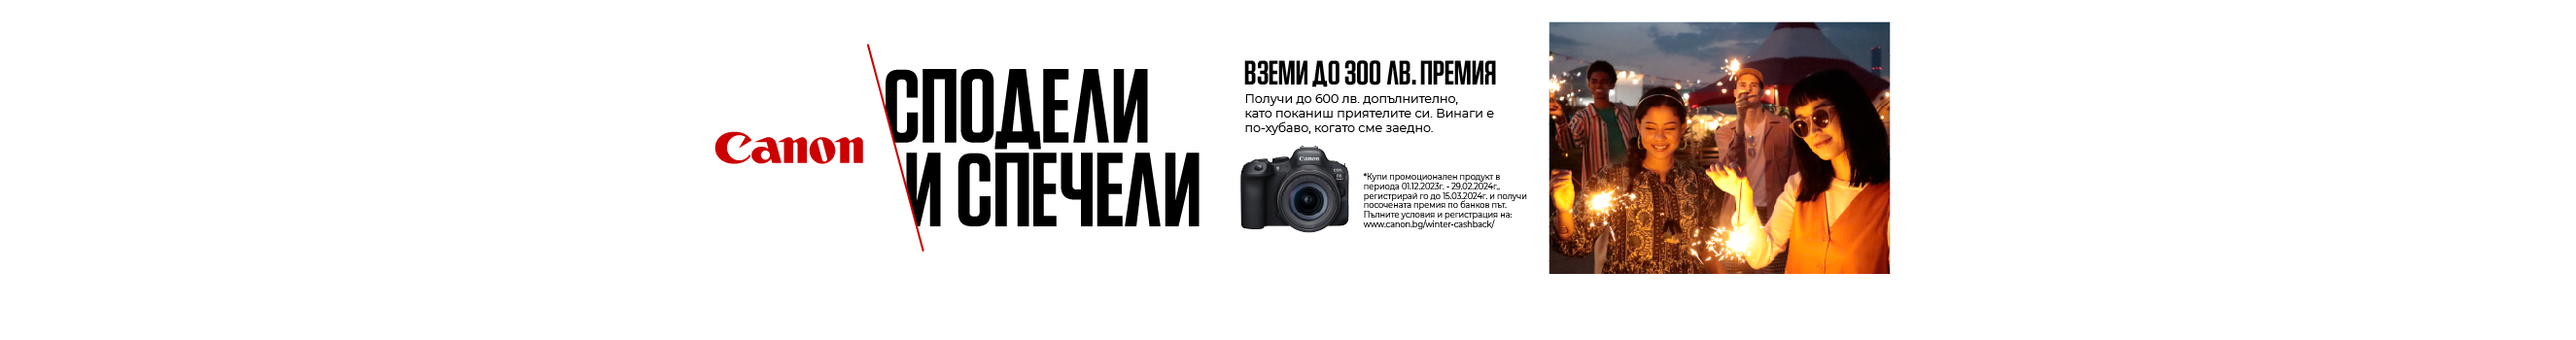  Up to BGN 300 Discount on Canon EOS Cameras and Lenses in PhotoSynthesis Stores upon registration